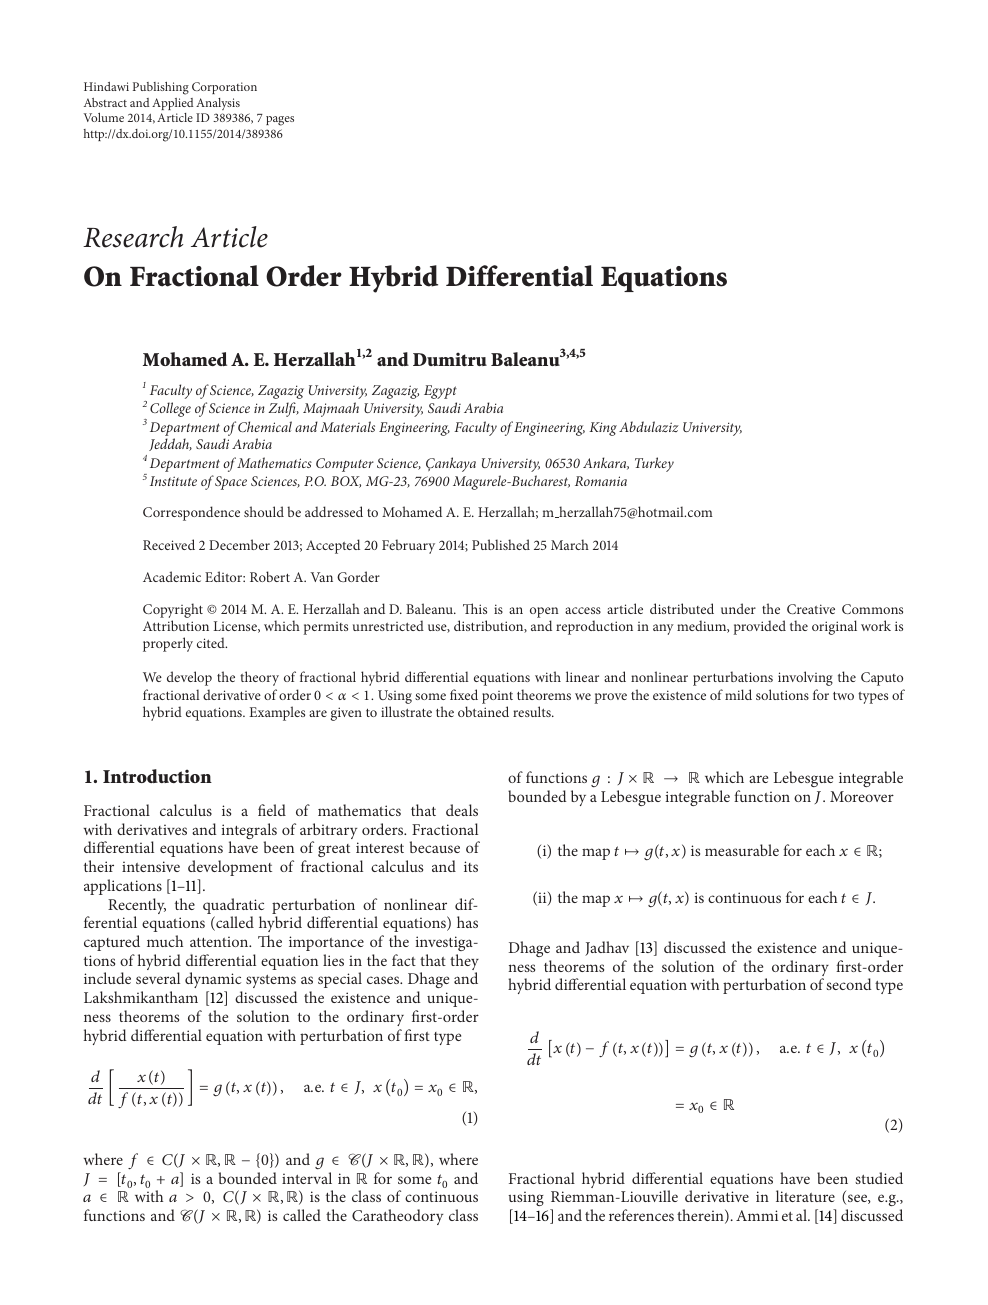 On Fractional Order Hybrid Differential Equations Topic Of Research Paper In Mathematics Download Scholarly Article Pdf And Read For Free On Cyberleninka Open Science Hub